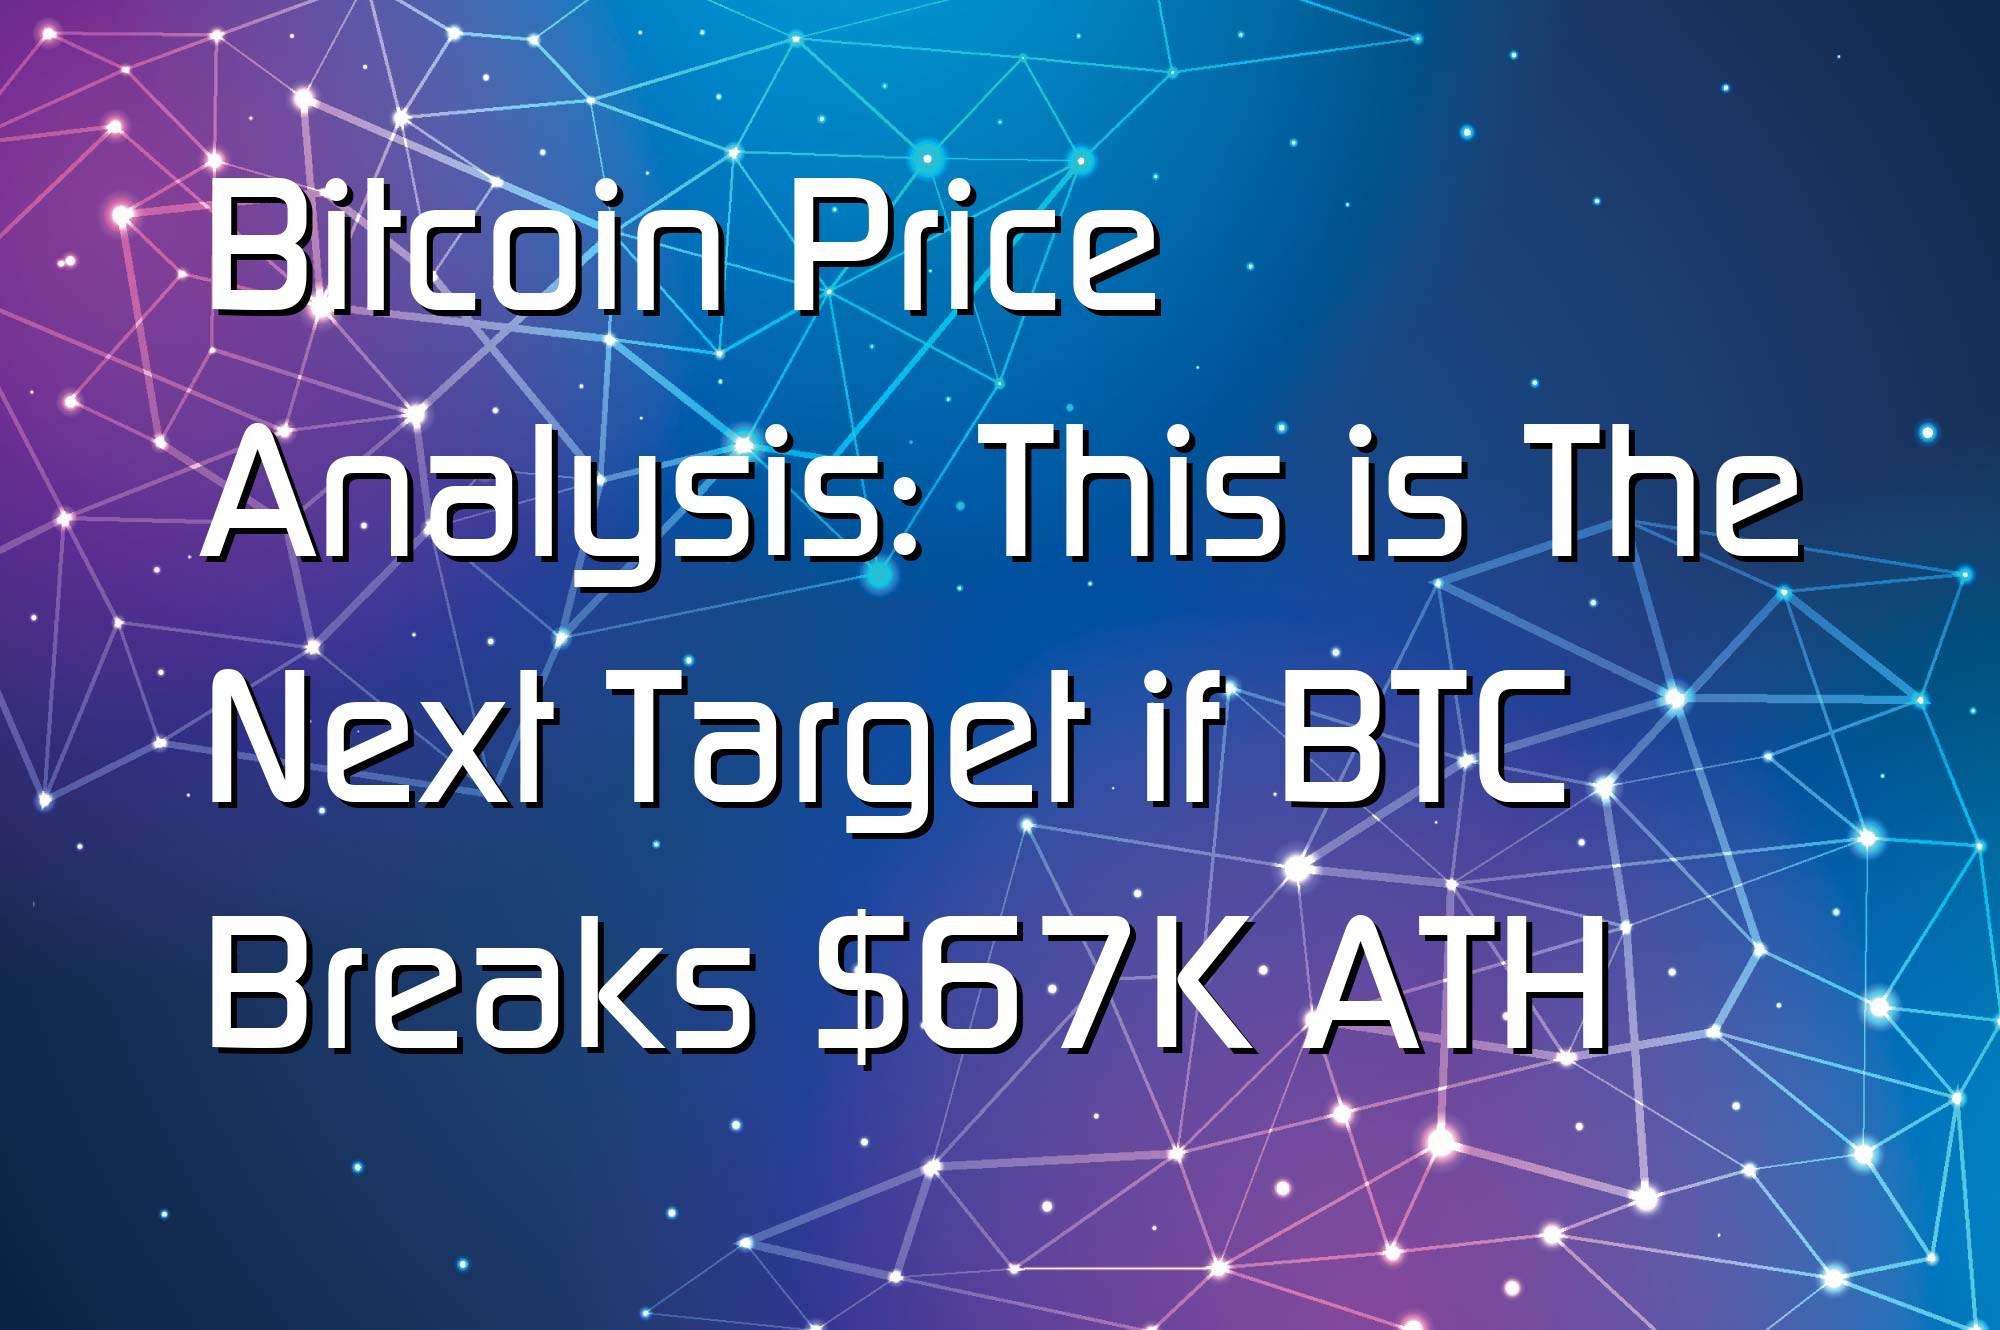 @$65988: Bitcoin Price Analysis: This is The Next Target if BTC Breaks $67K ATH